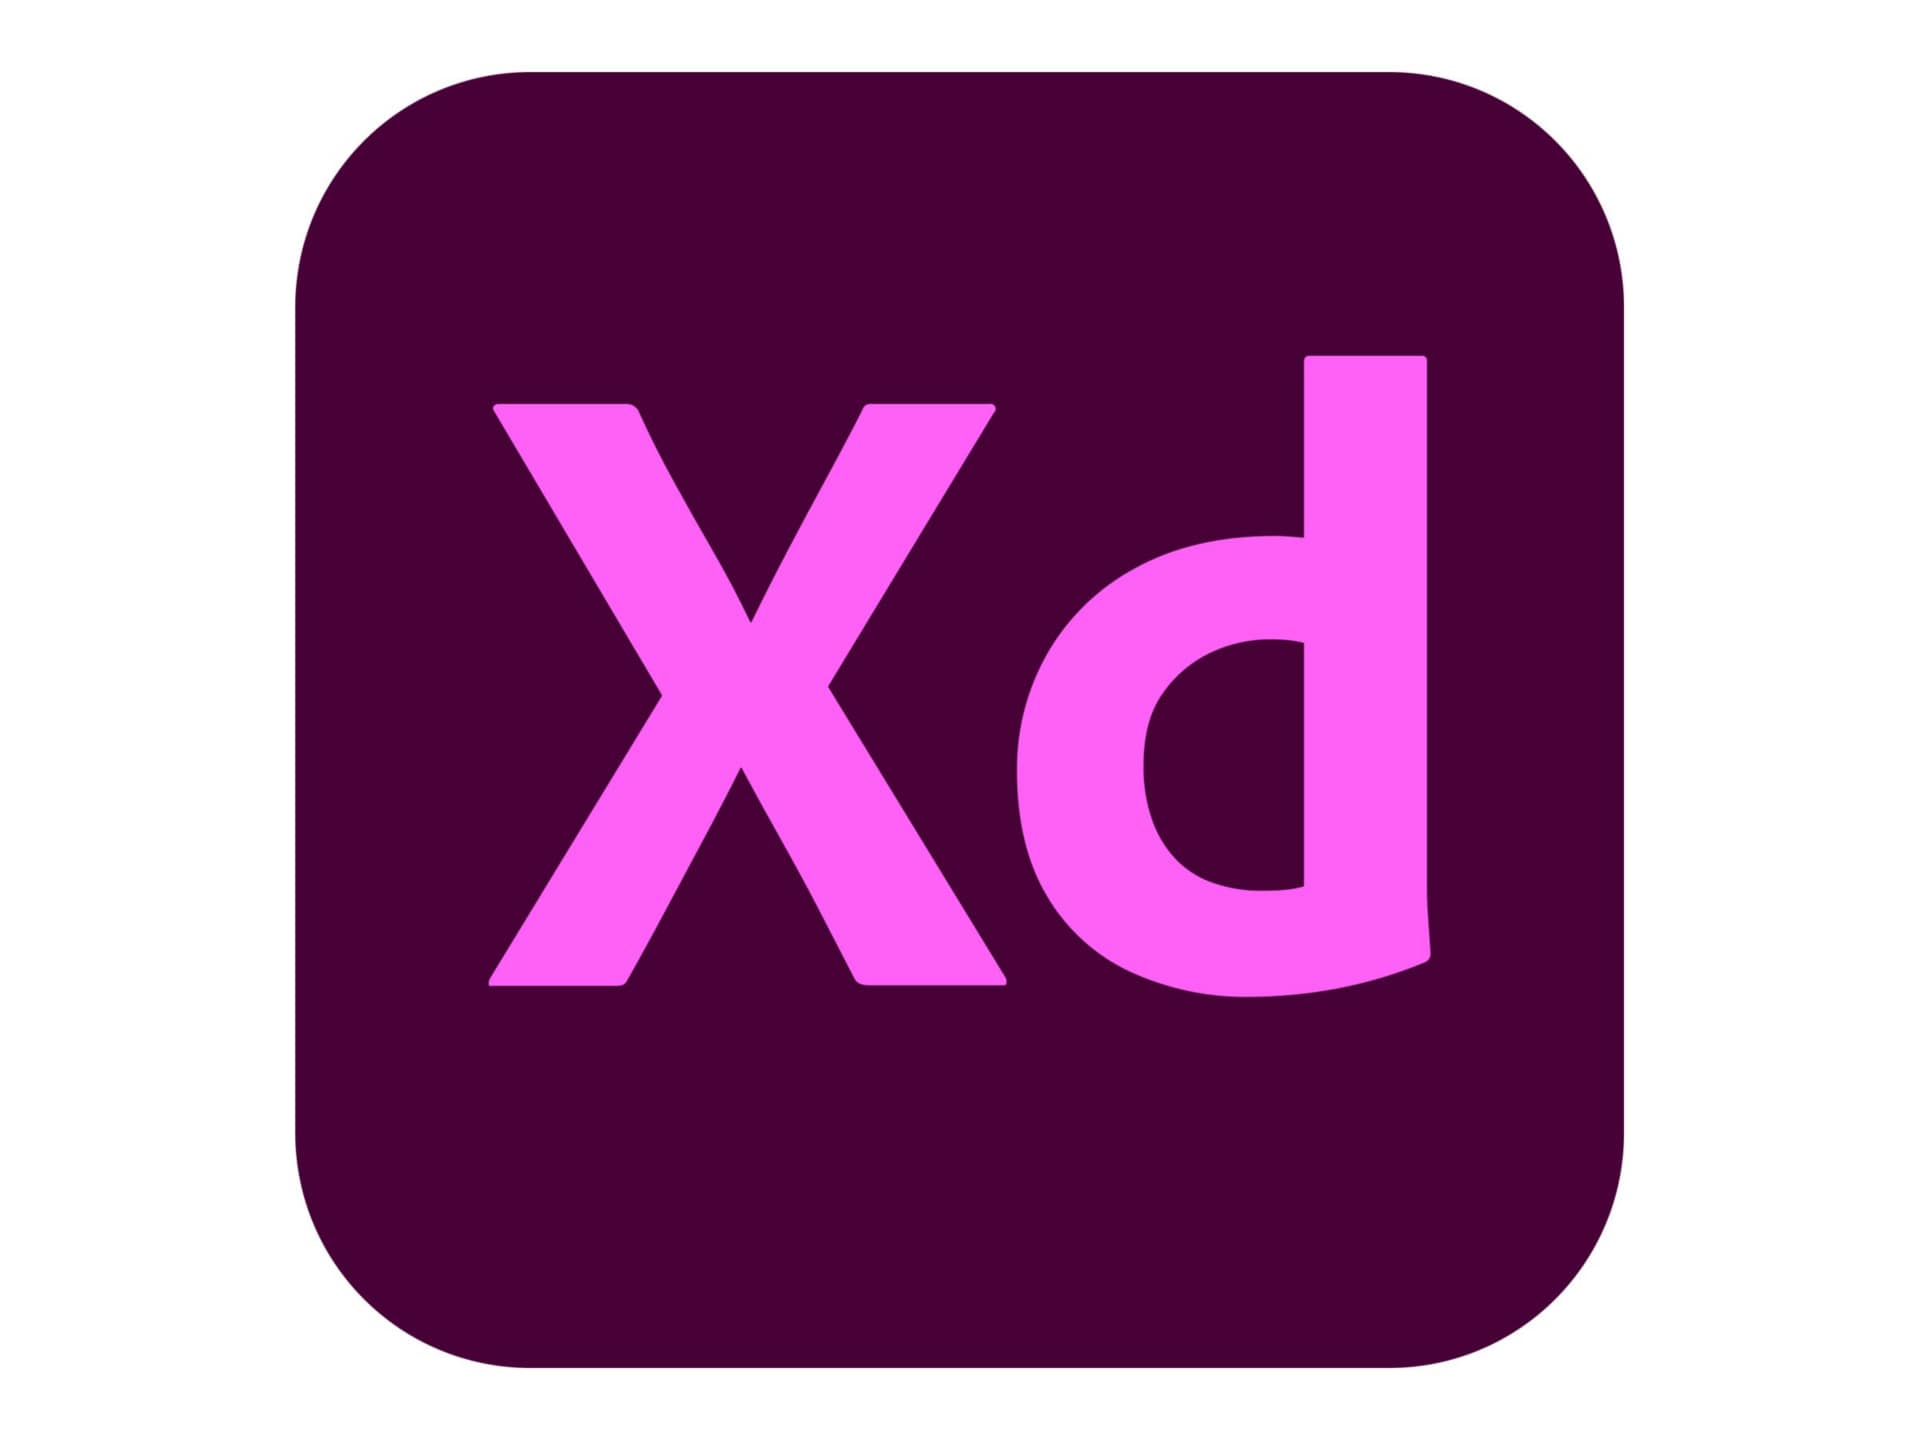 Adobe XD Pro for teams - Subscription Renewal - 1 user